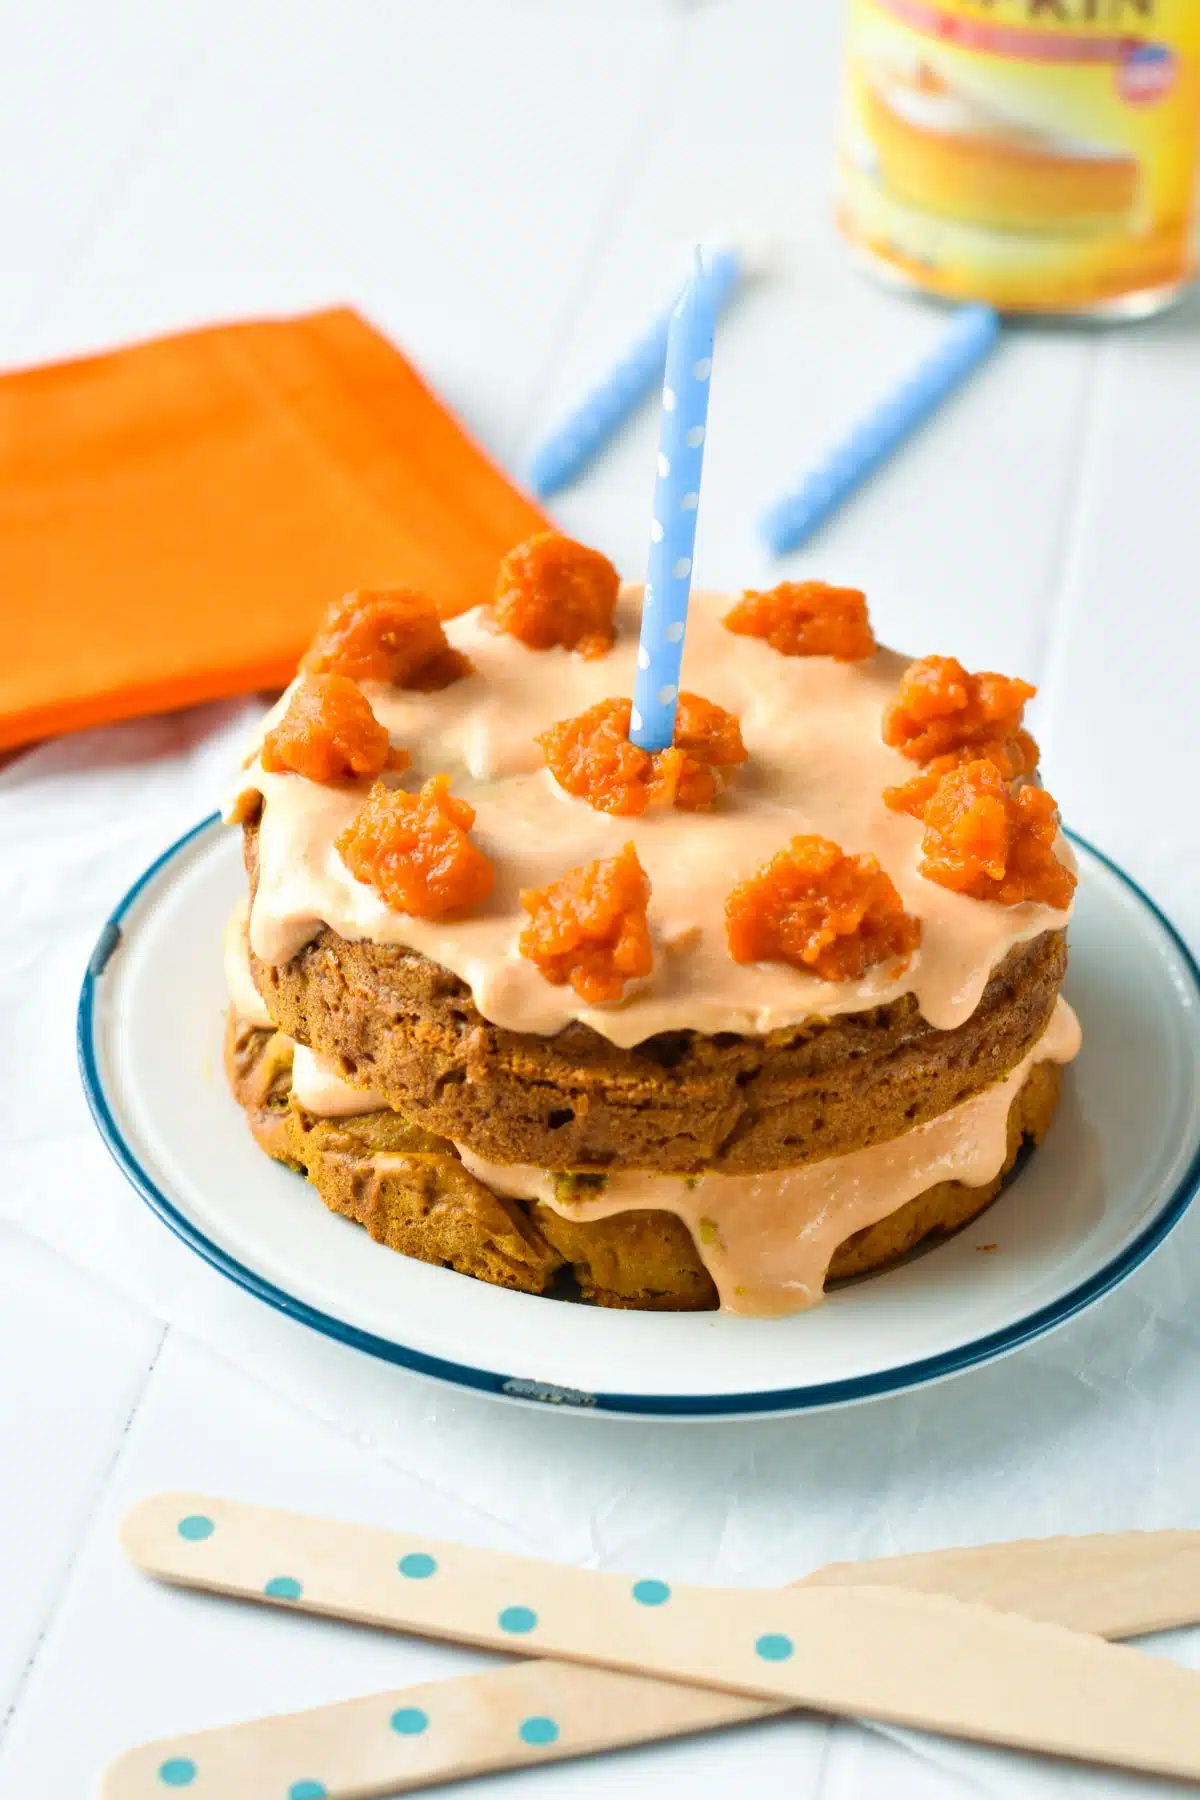 This Pumpkin Dog Cake Recipe is an easy one bowl cake for dogs to celebrate fall. It's packed with homemade pumpkin puree, peanut butter and oats for an healthy treat for your furry friend.This Pumpkin Dog Cake Recipe is an easy one bowl cake for dogs to celebrate fall. It's packed with homemade pumpkin puree, peanut butter and oats for an healthy treat for your furry friend.